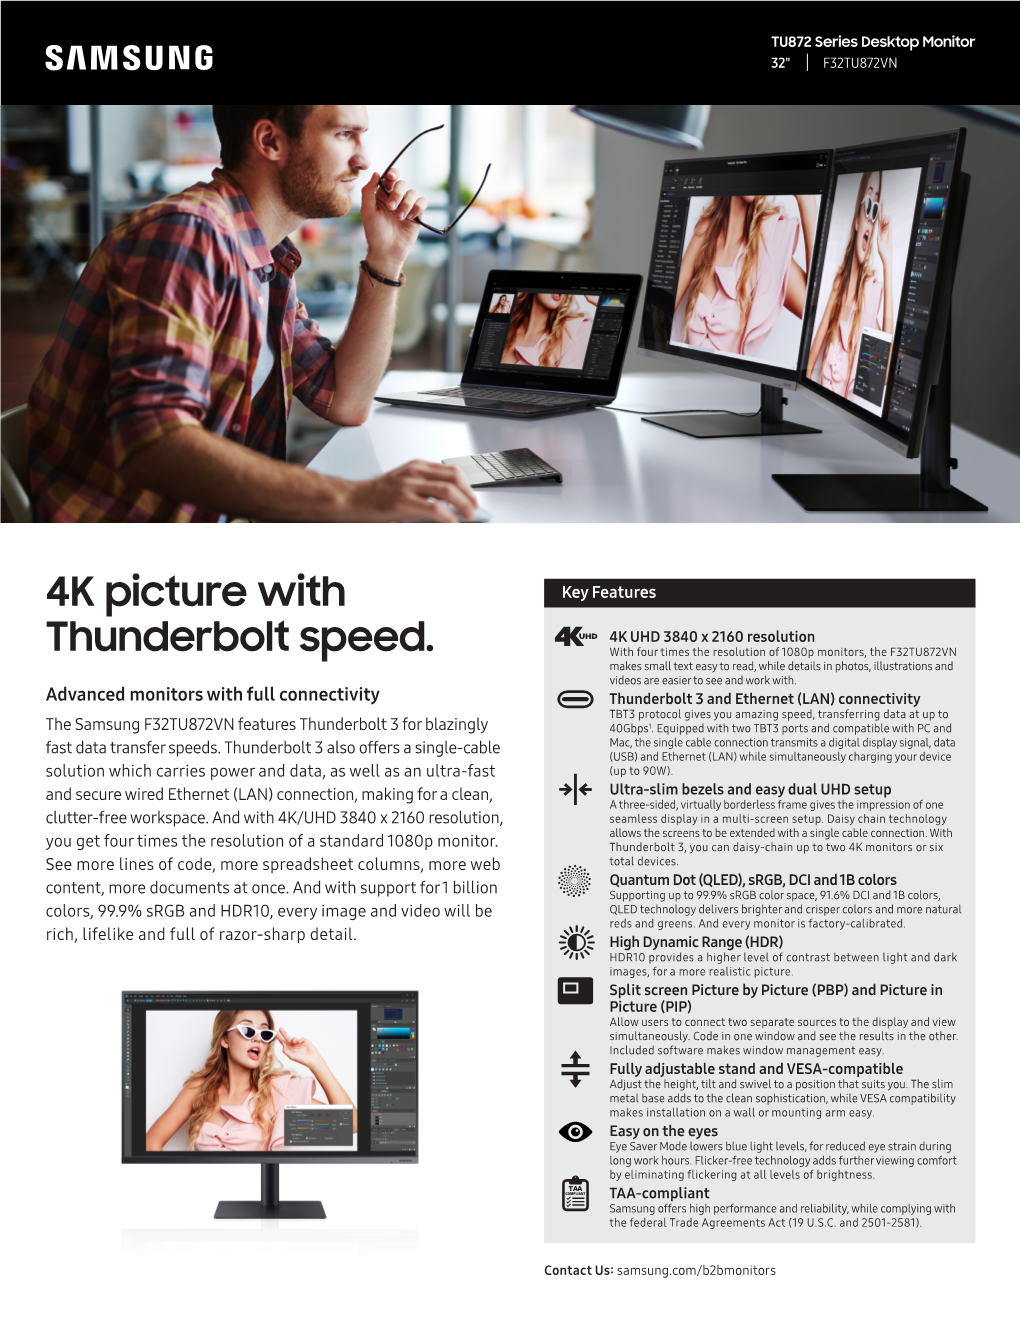 4K Picture with Thunderbolt Speed